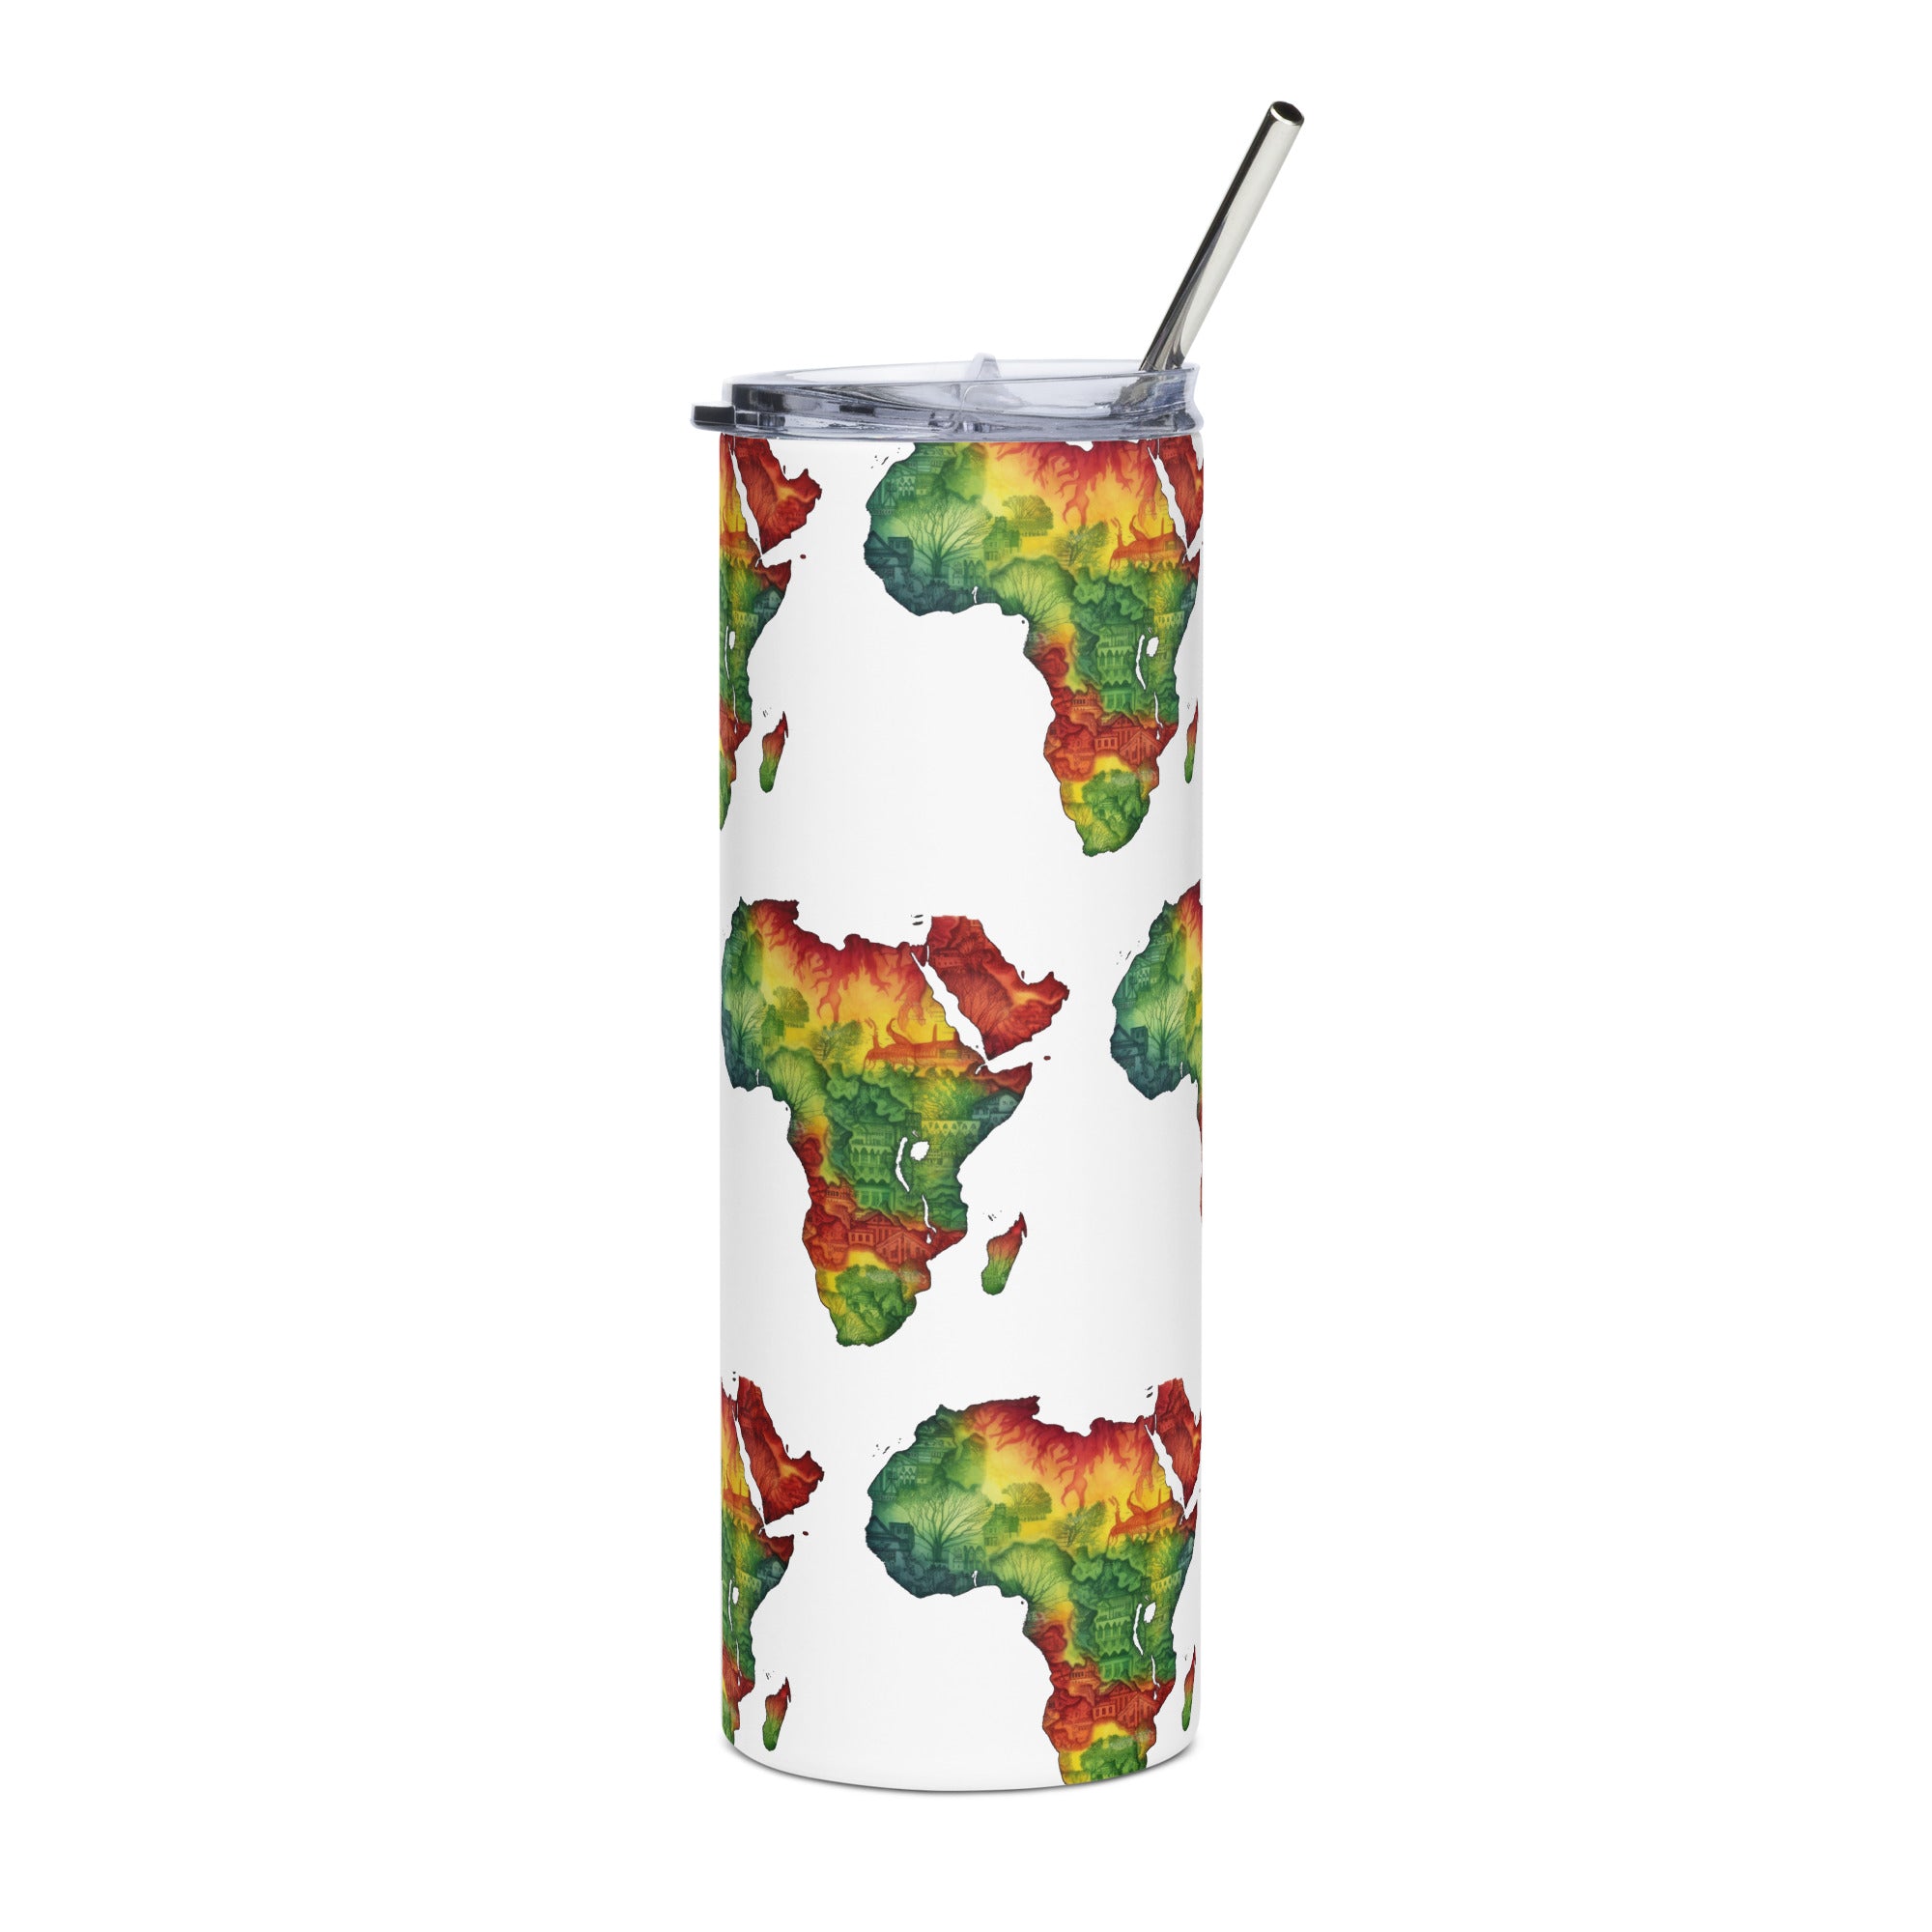 Stainless steel tumbler, Africa, Travel Mug, Coffee Cup, gift, Hot/Cold,